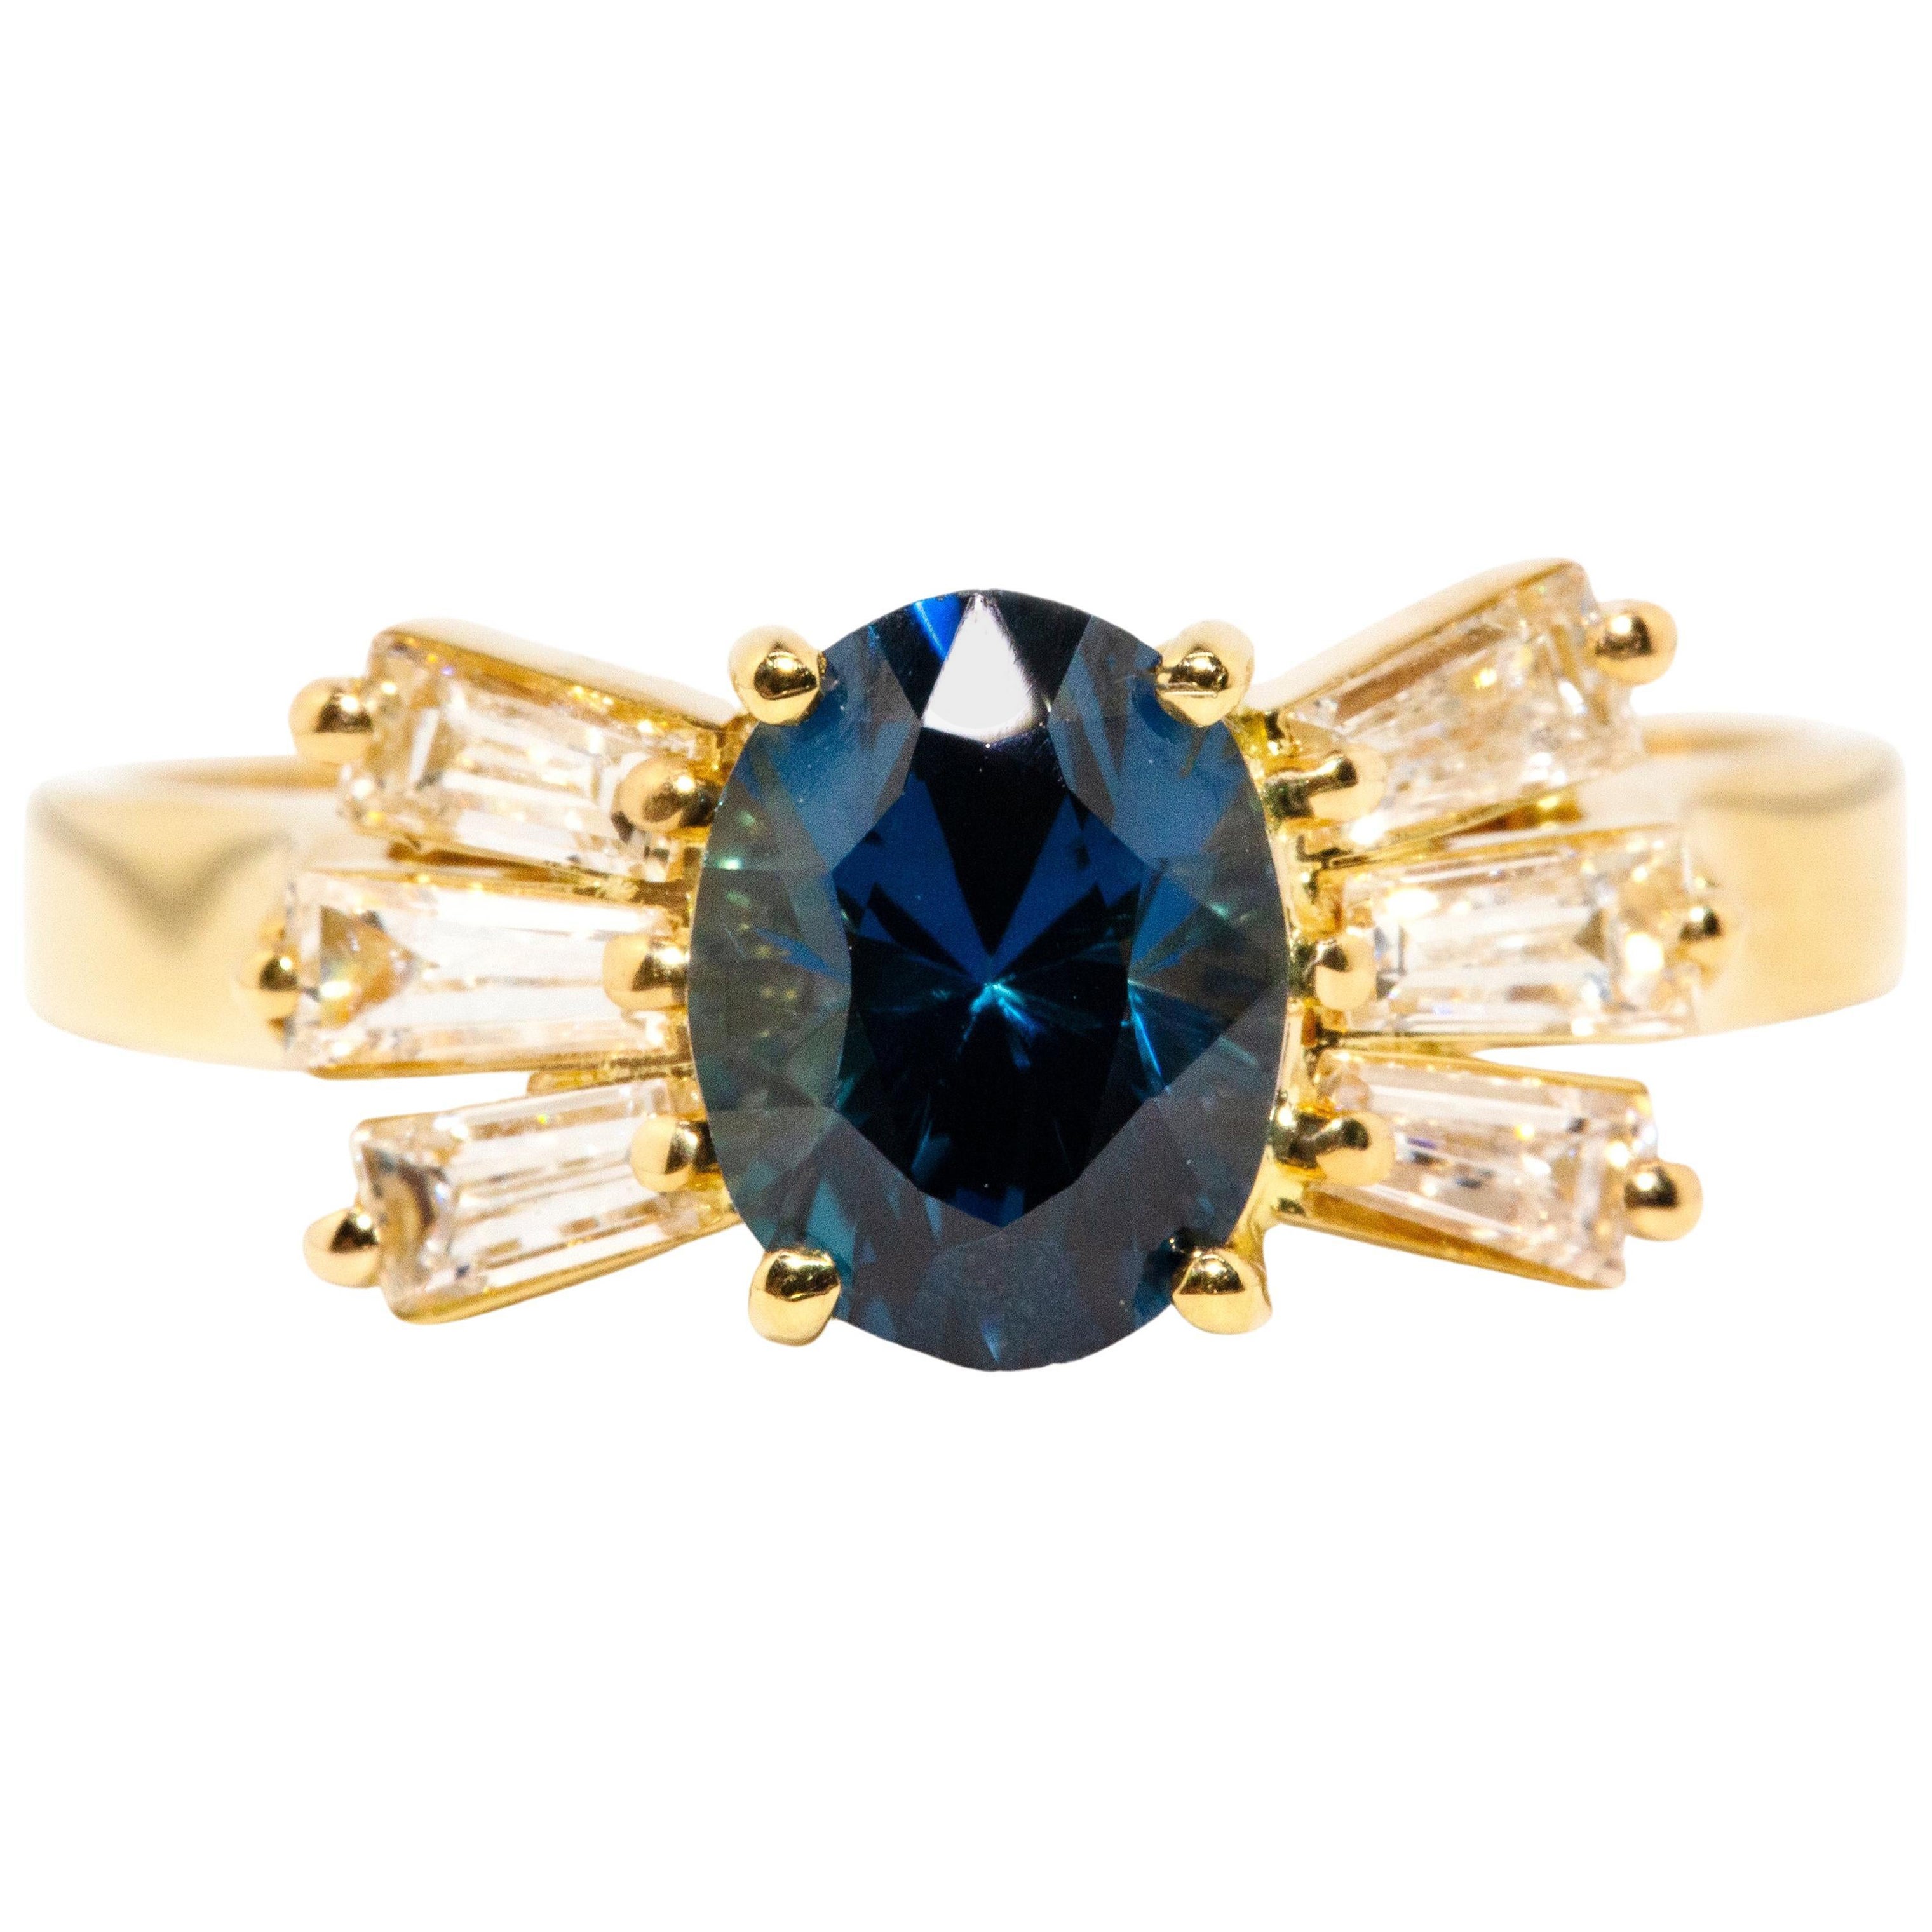 Vintage Circa 1980s 1.78 Carat Sapphire & Baguette Diamond Ring 18ct Yellow Gold For Sale